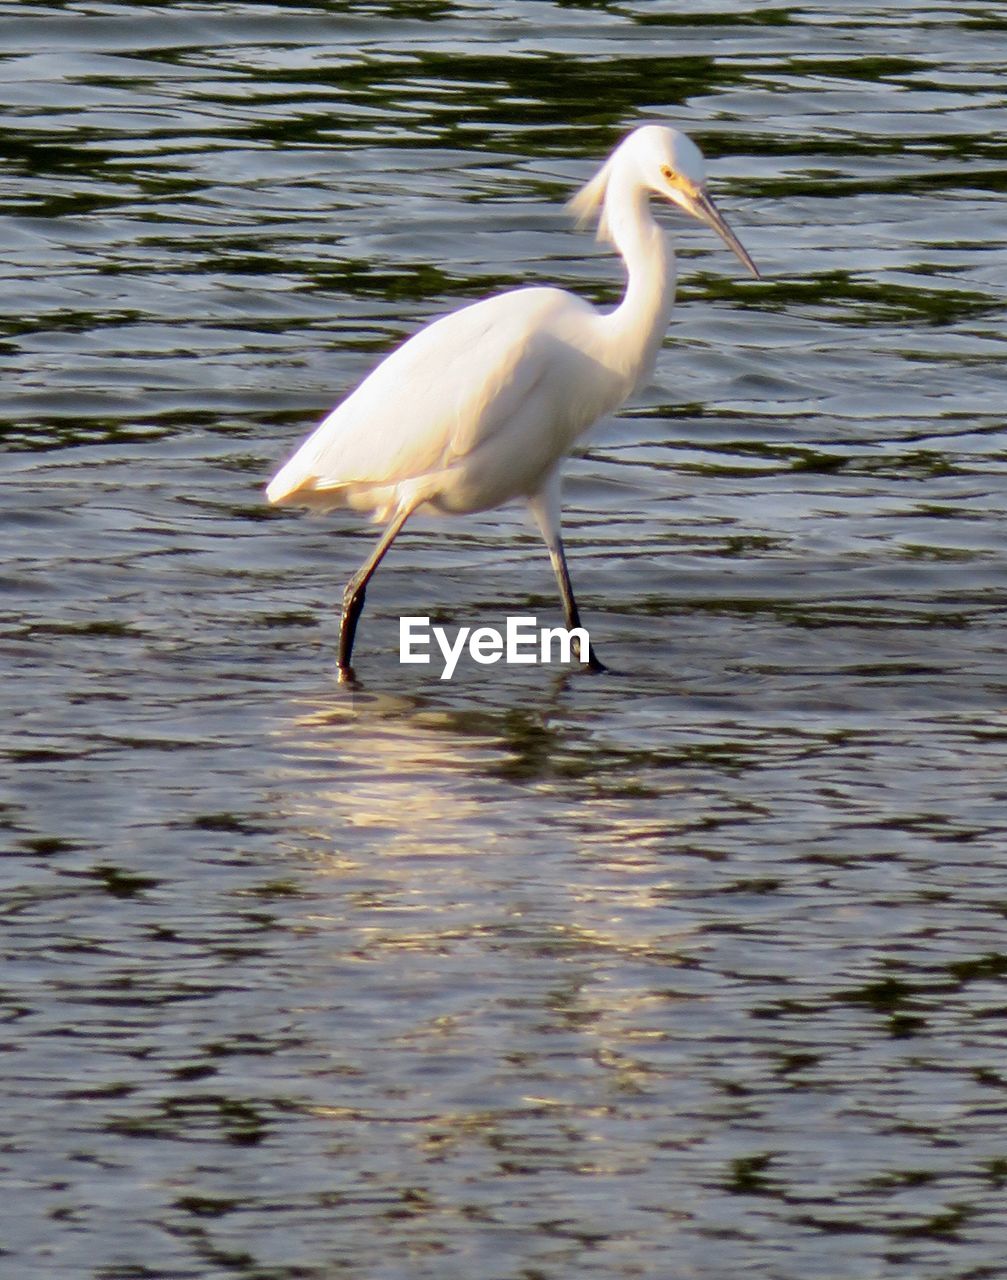 VIEW OF BIRD IN LAKE